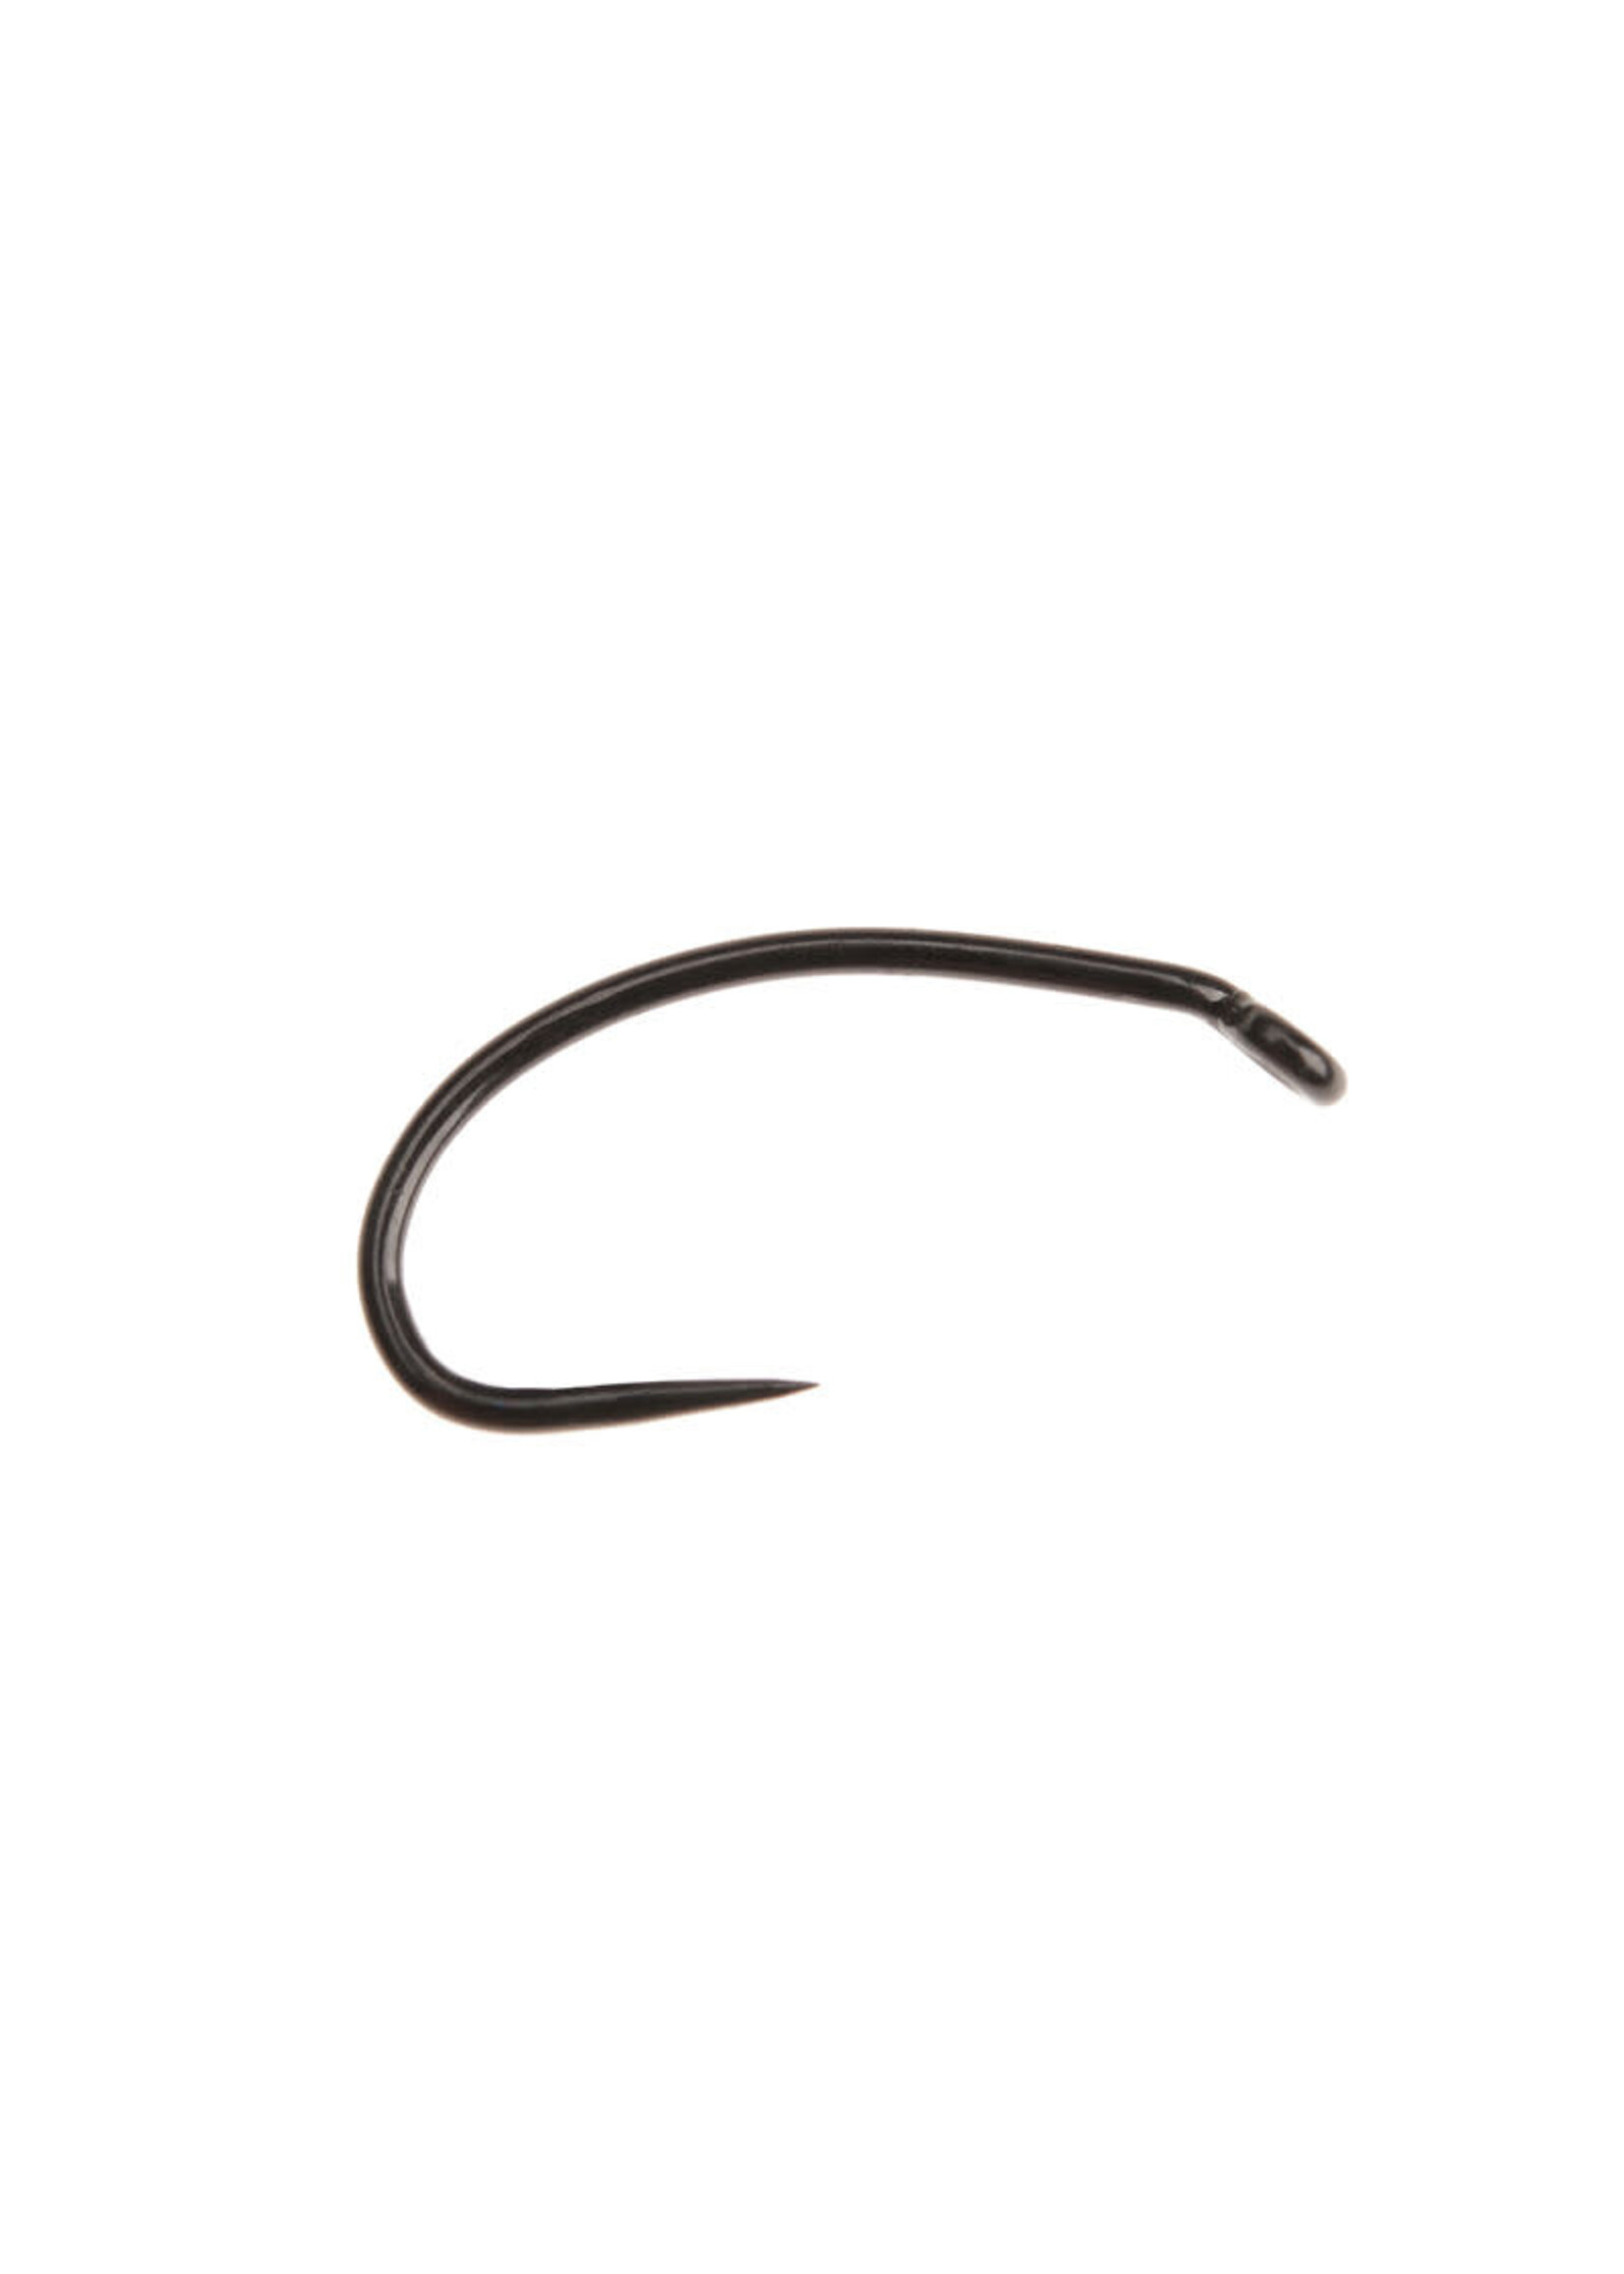 Ahrex Ahrex FW541 Curved Nymph Barbless Hook